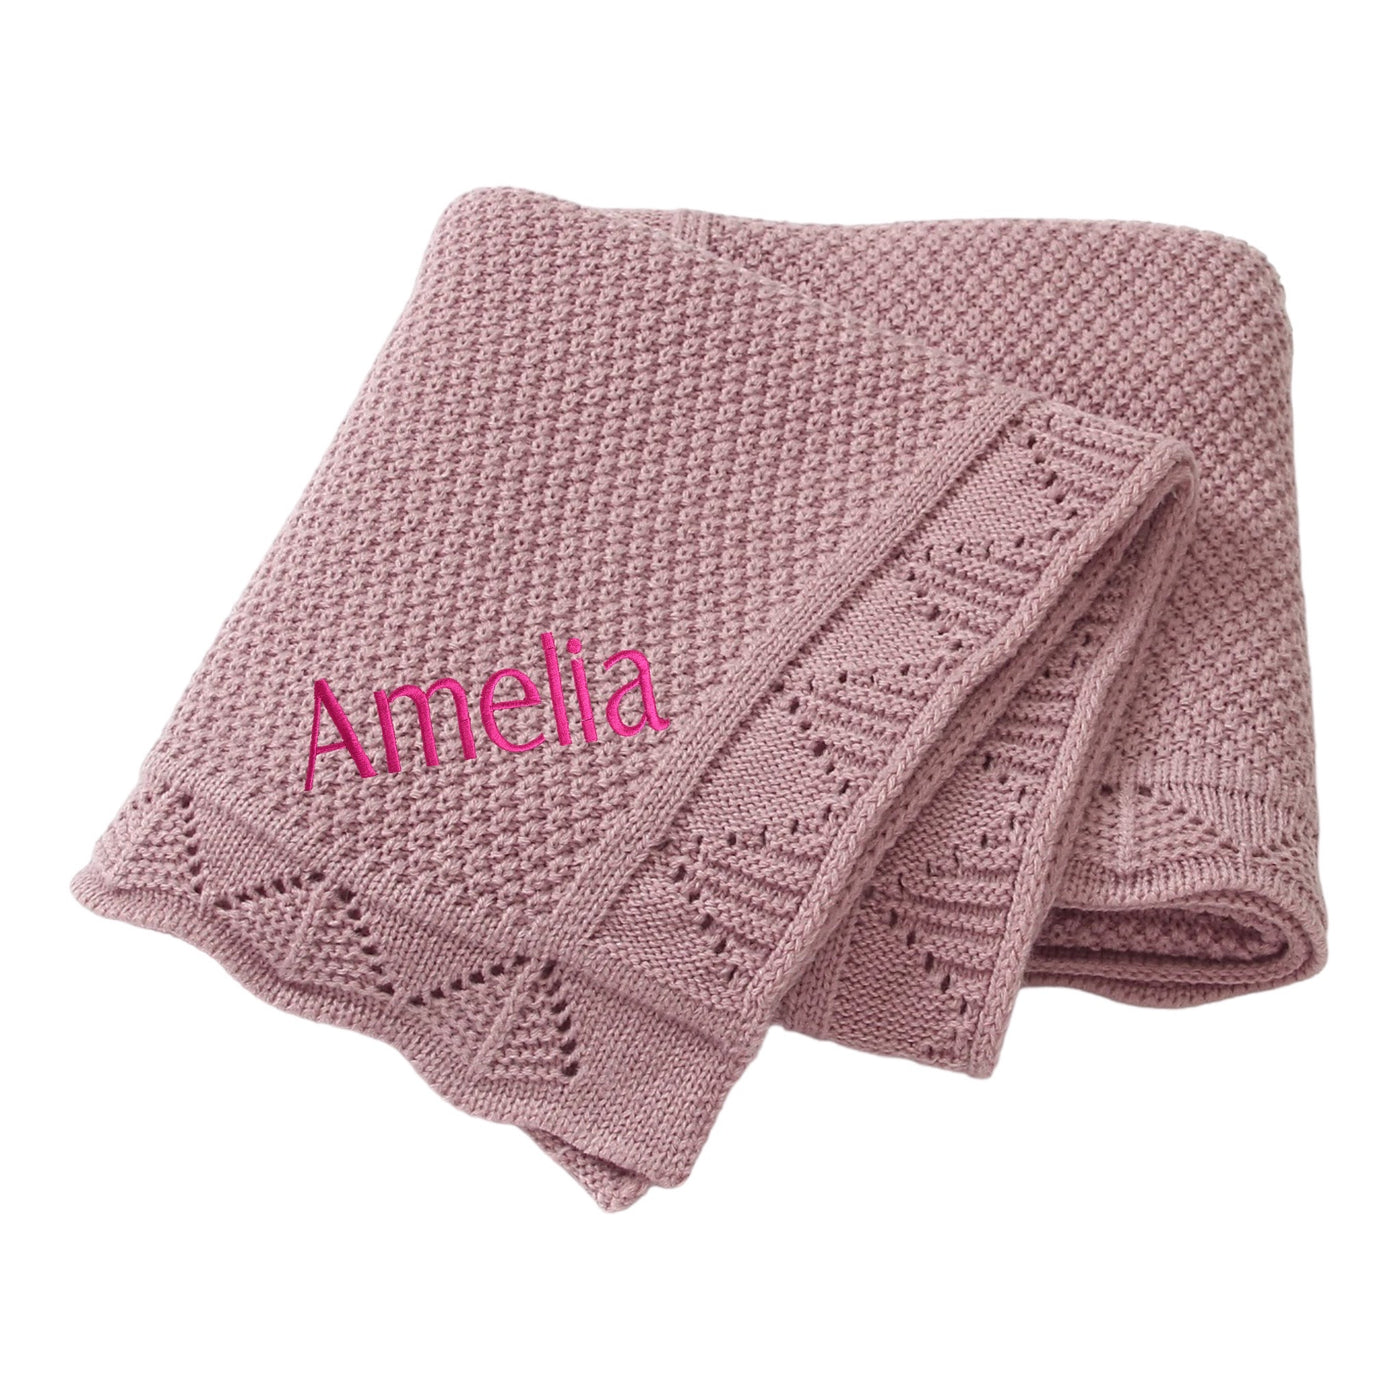 MUSK BABY BLANKET KNITTED NEWBORN SWADDLE WRAP